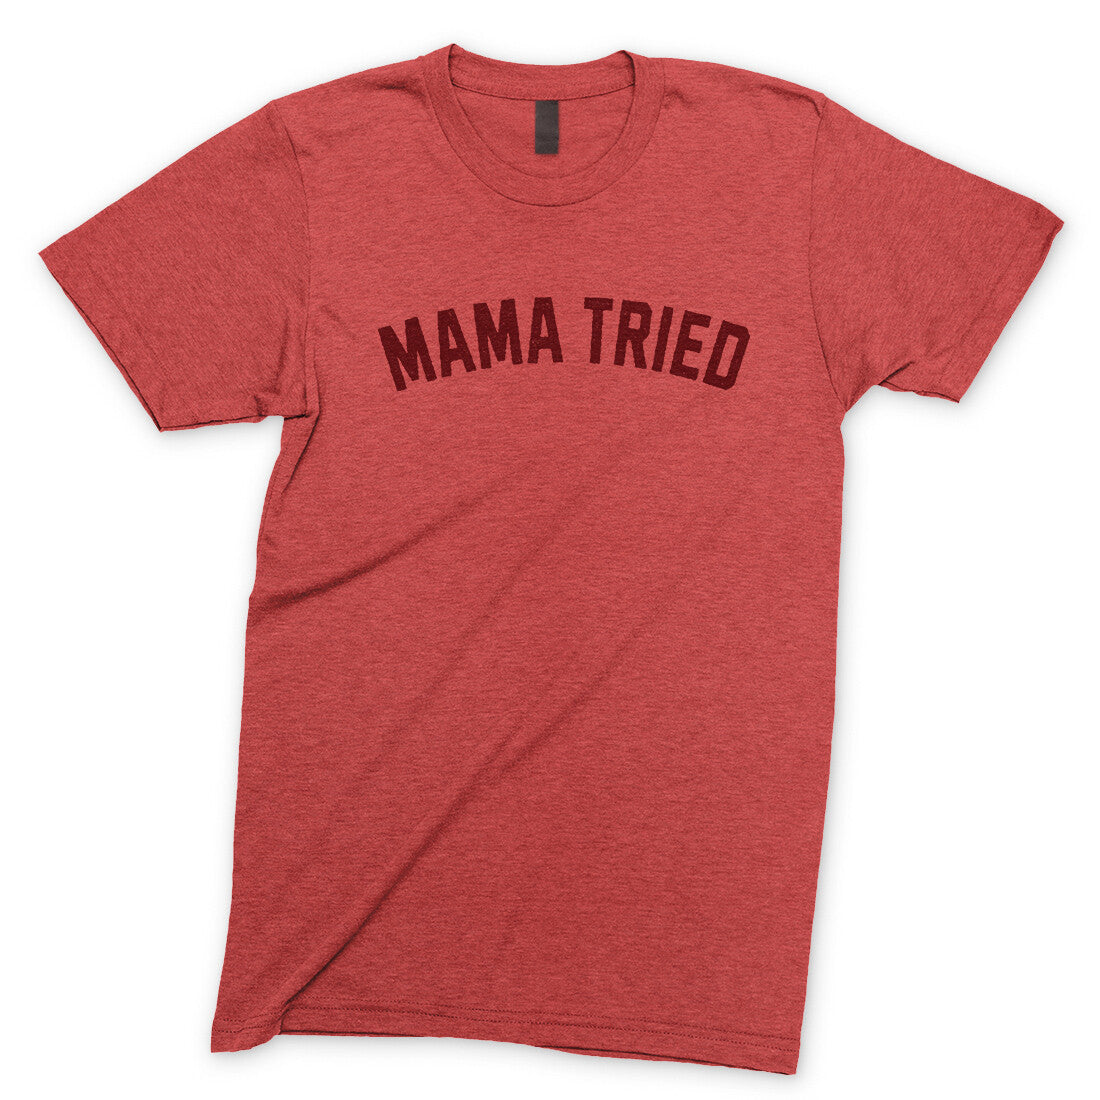 Mama Tried in Heather Red Color